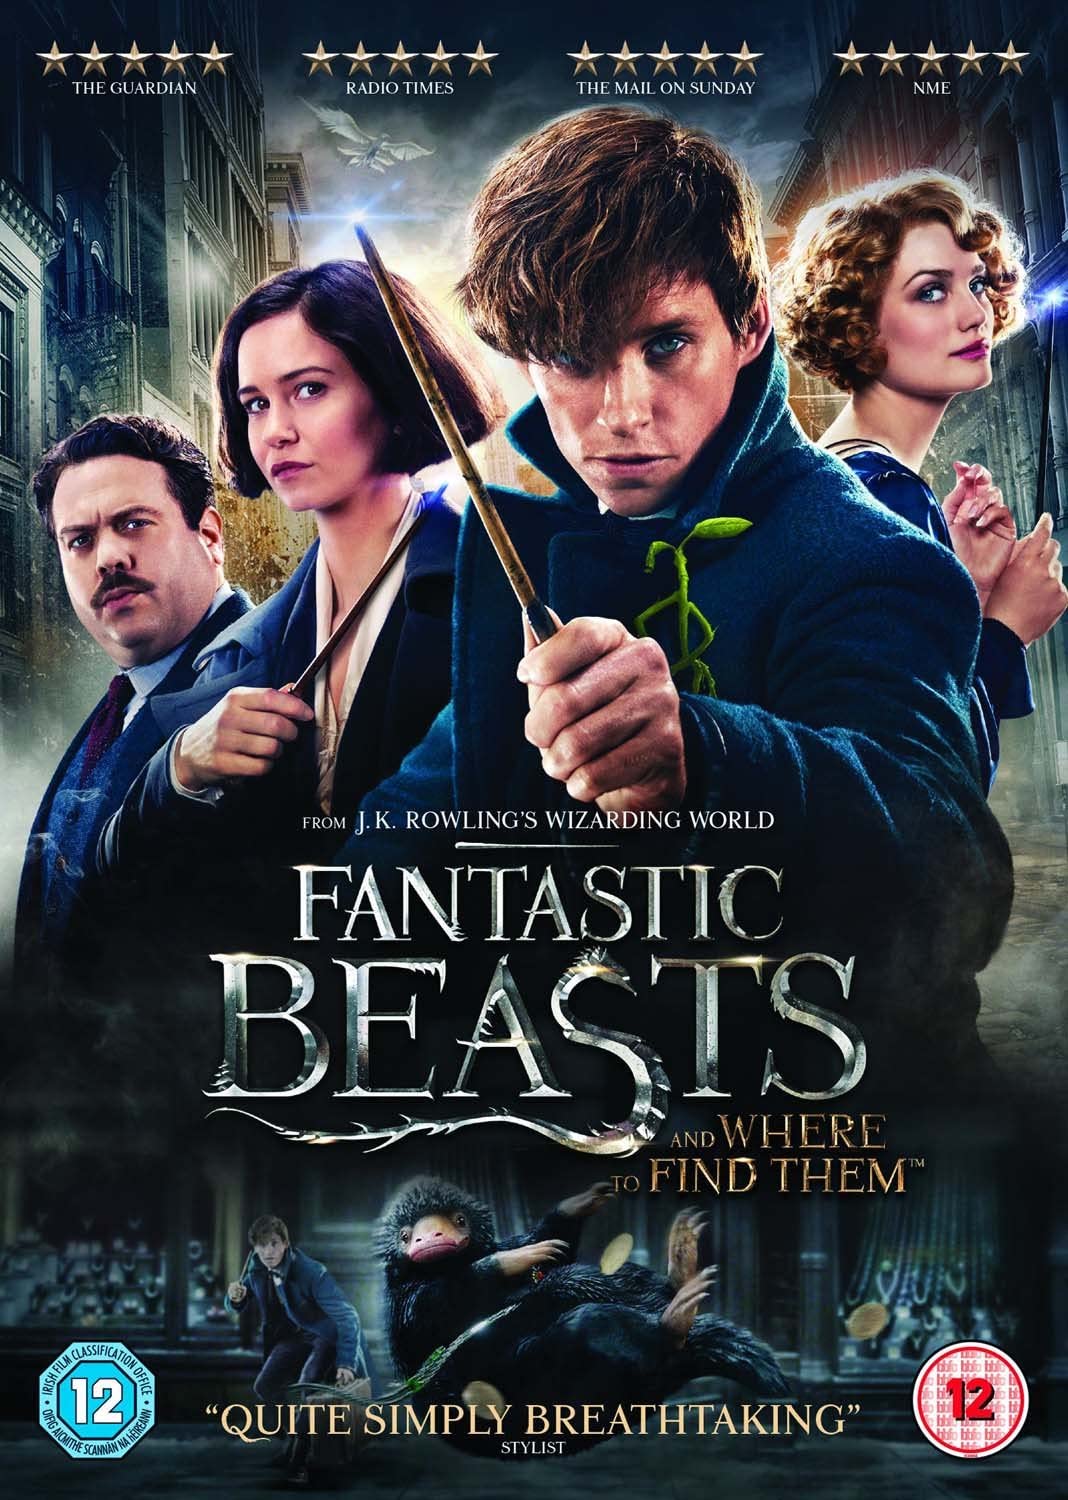 FANTASTIC BEASTS AND WHERE FIND THEM